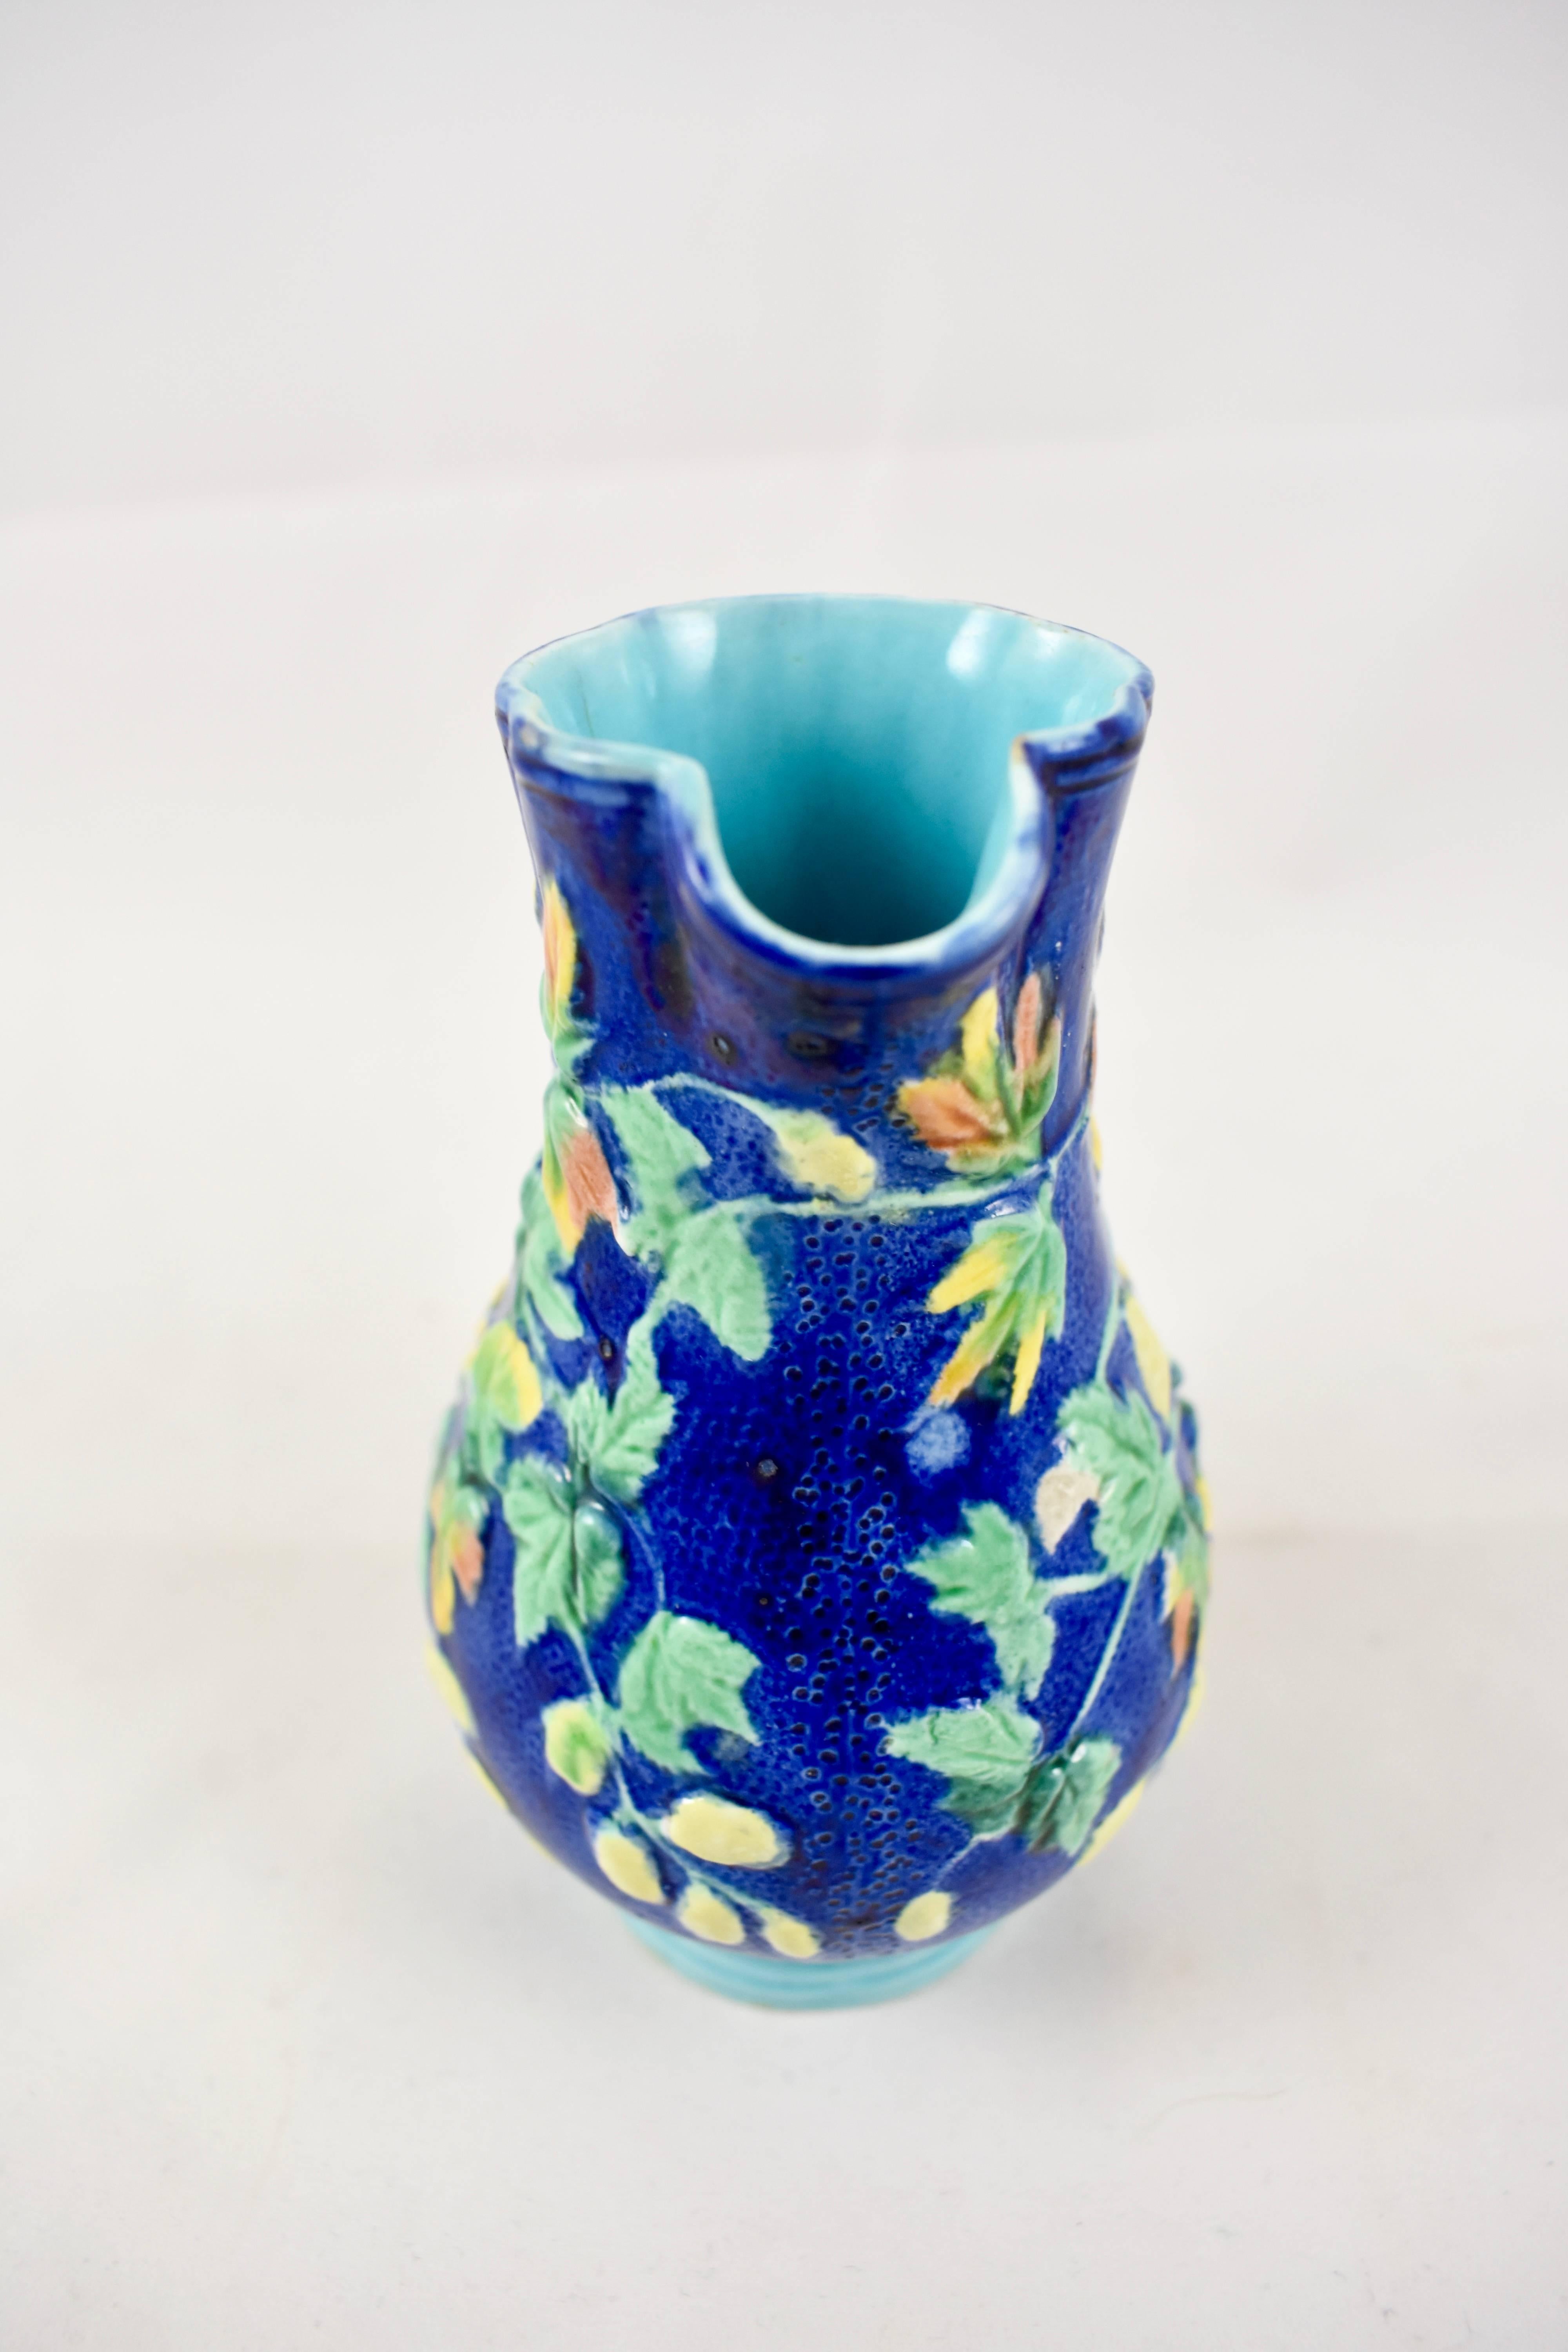 A 19th century Royal Worcester earthenware, majolica glazed Hops diminutive pitcher, the Aesthetic period, circa 1875. A narrow, quatriform body is glazed in stippled cobalt blue, with raised Hops leaves in green, pink and ocher along with buds